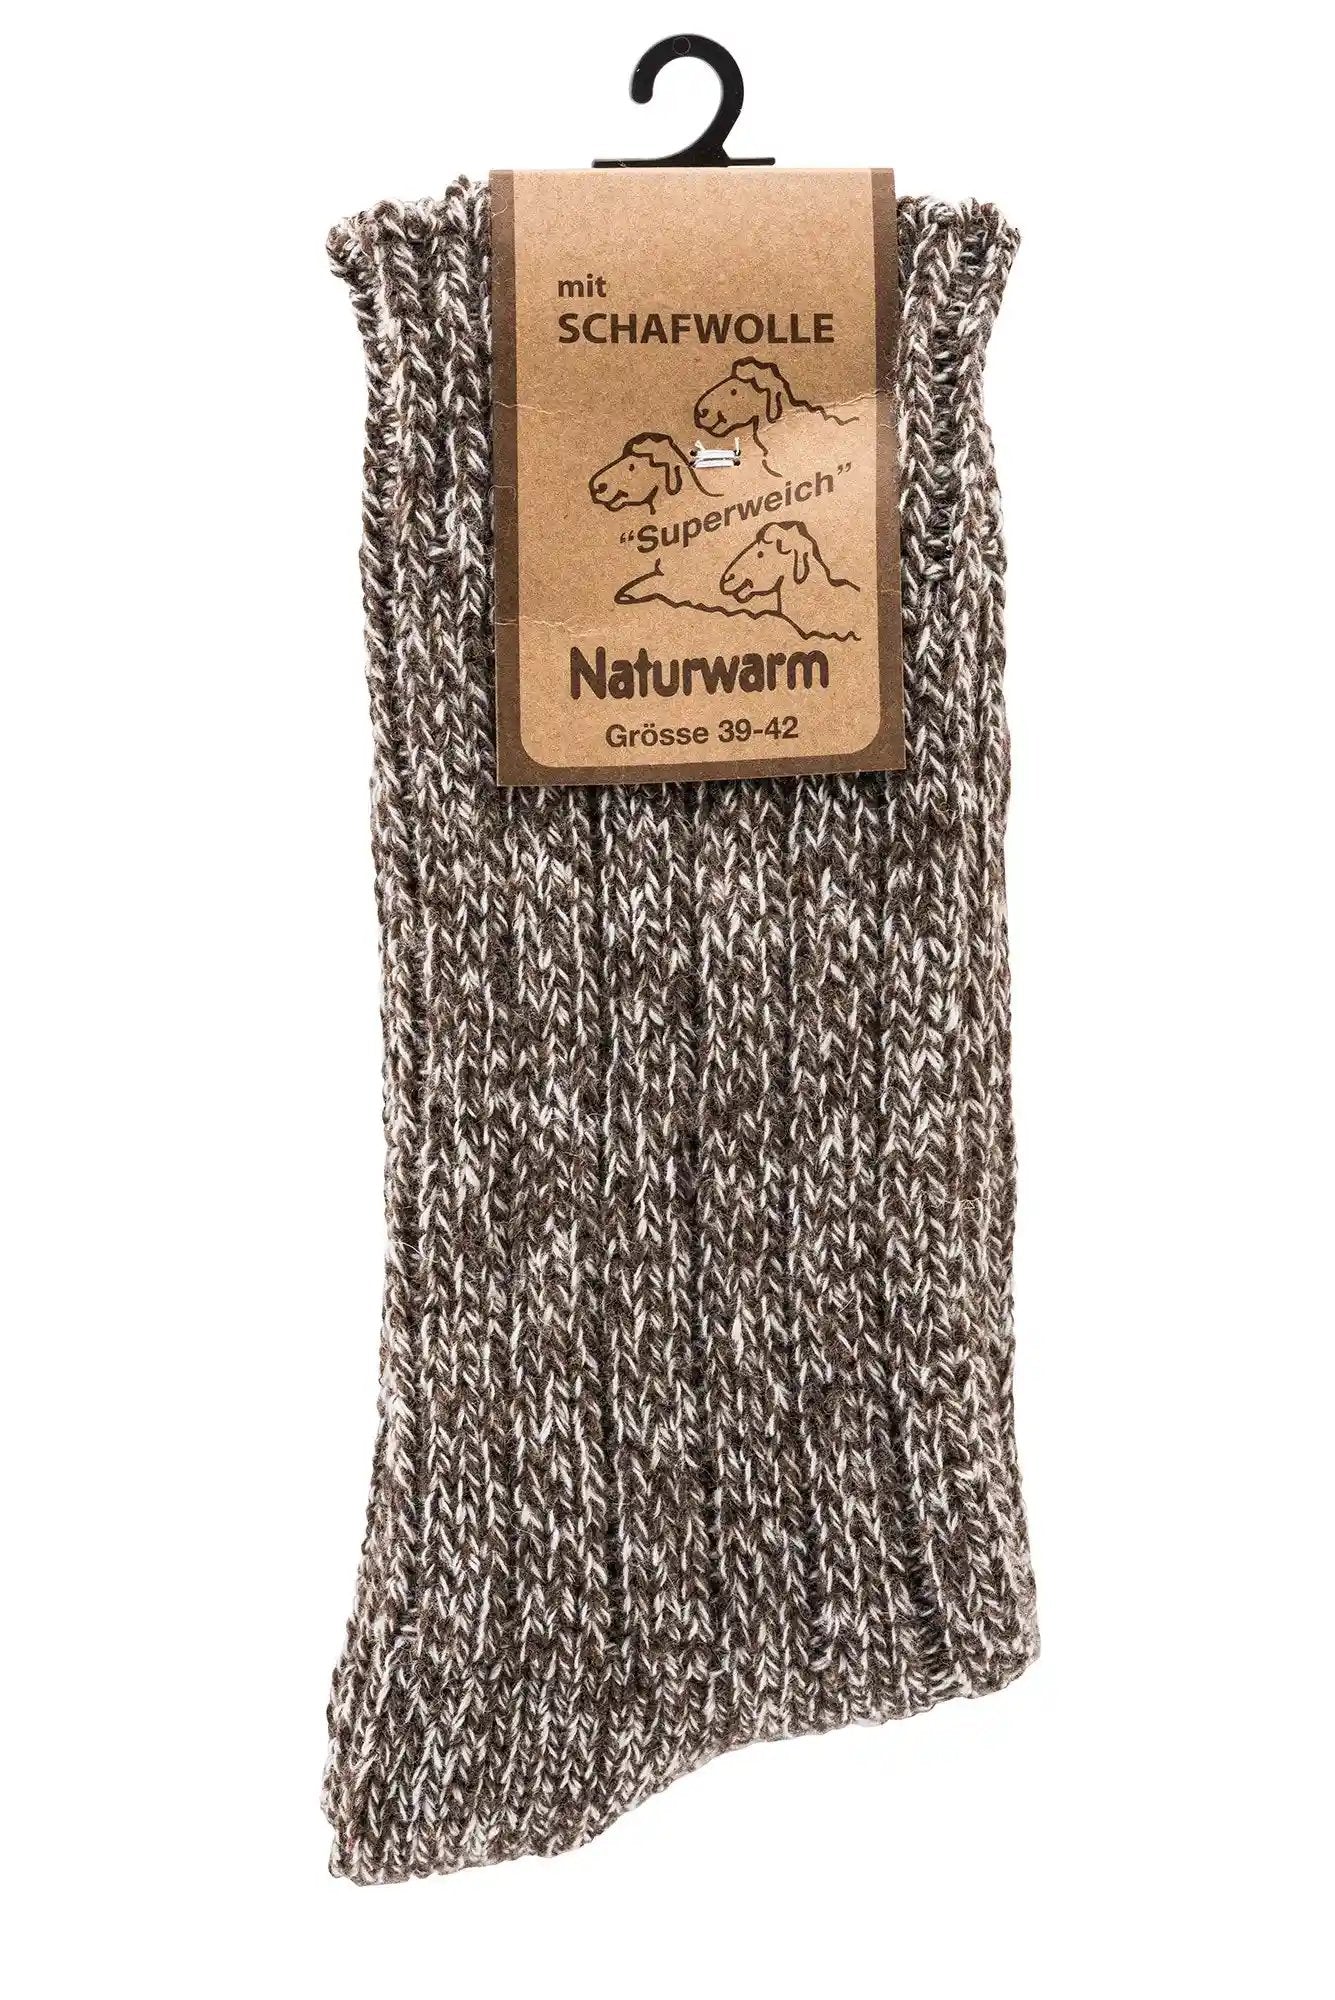 3 or 6 pairs of warm soft Norwegian socks with wool cotton viscose